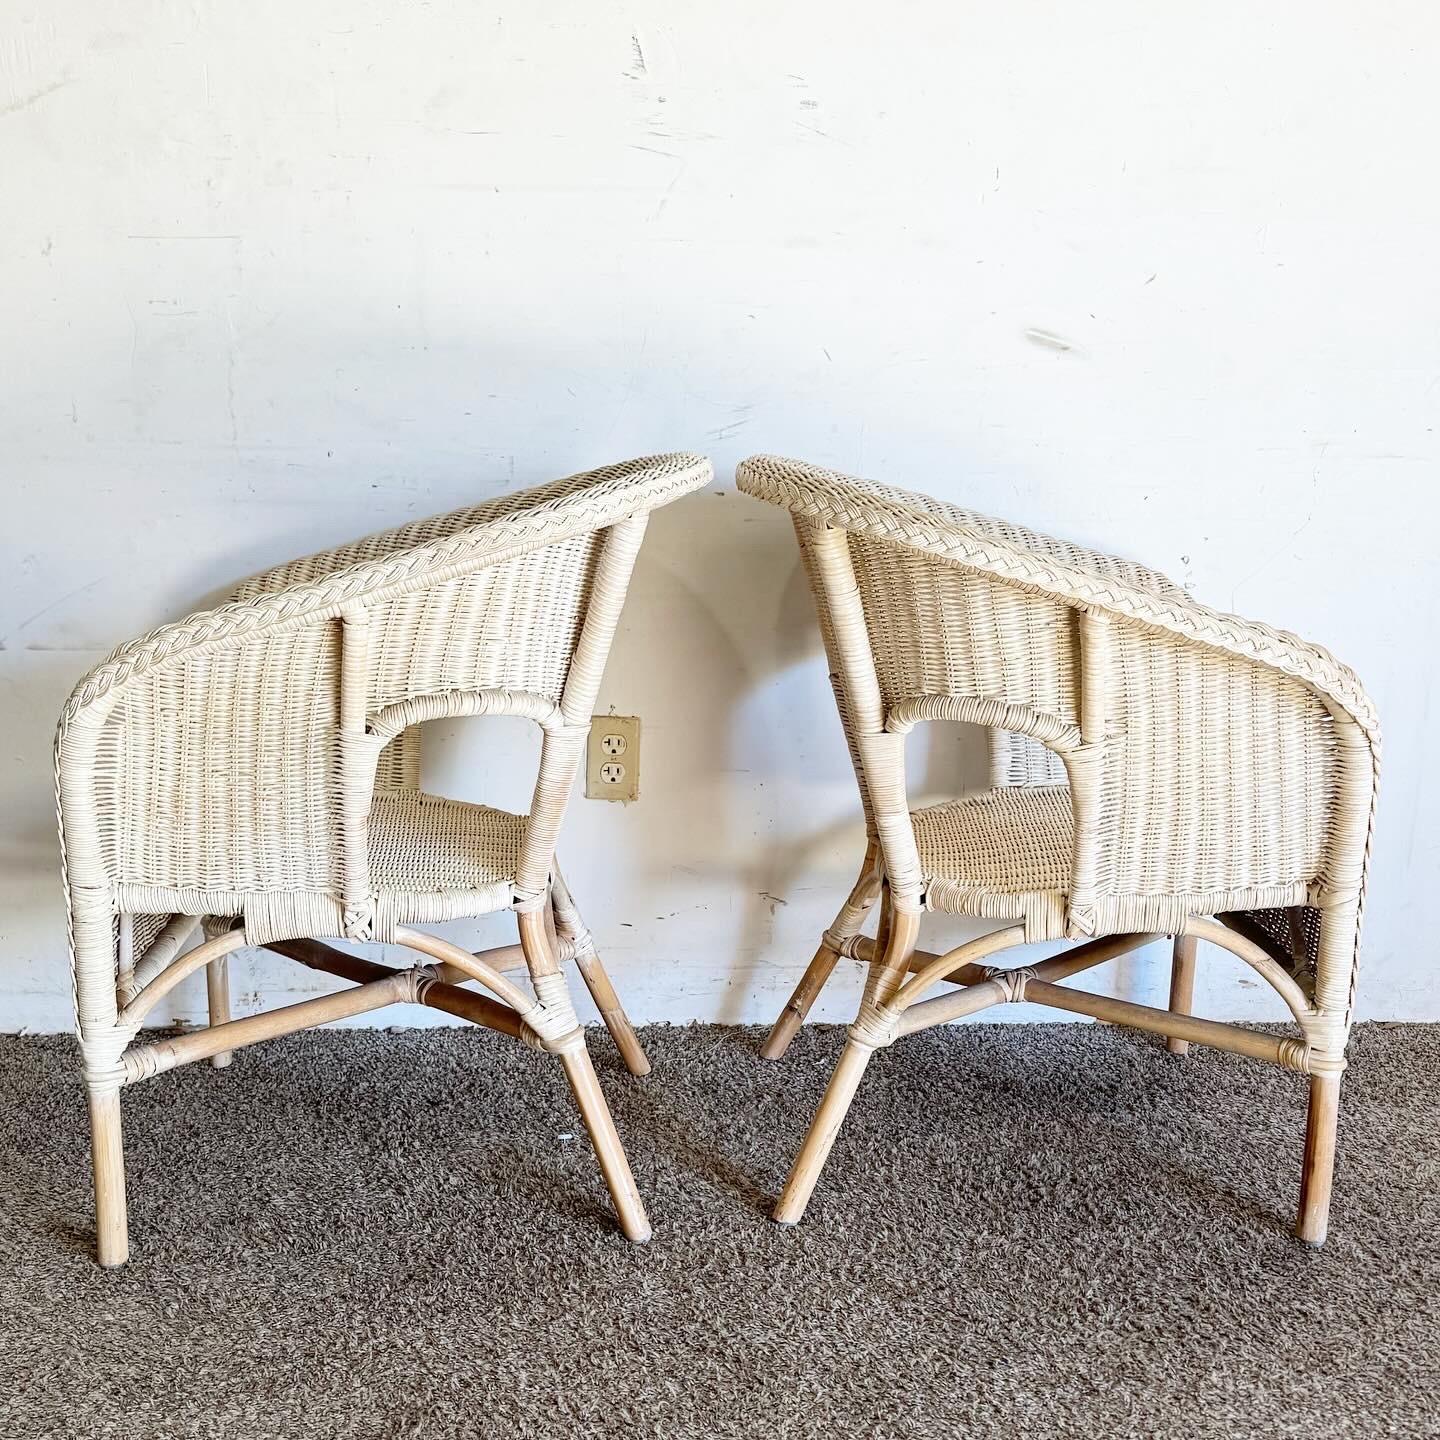 Late 20th Century Boho Chic White Washed Wicker and Rattan Lounge Chairs - a Pair